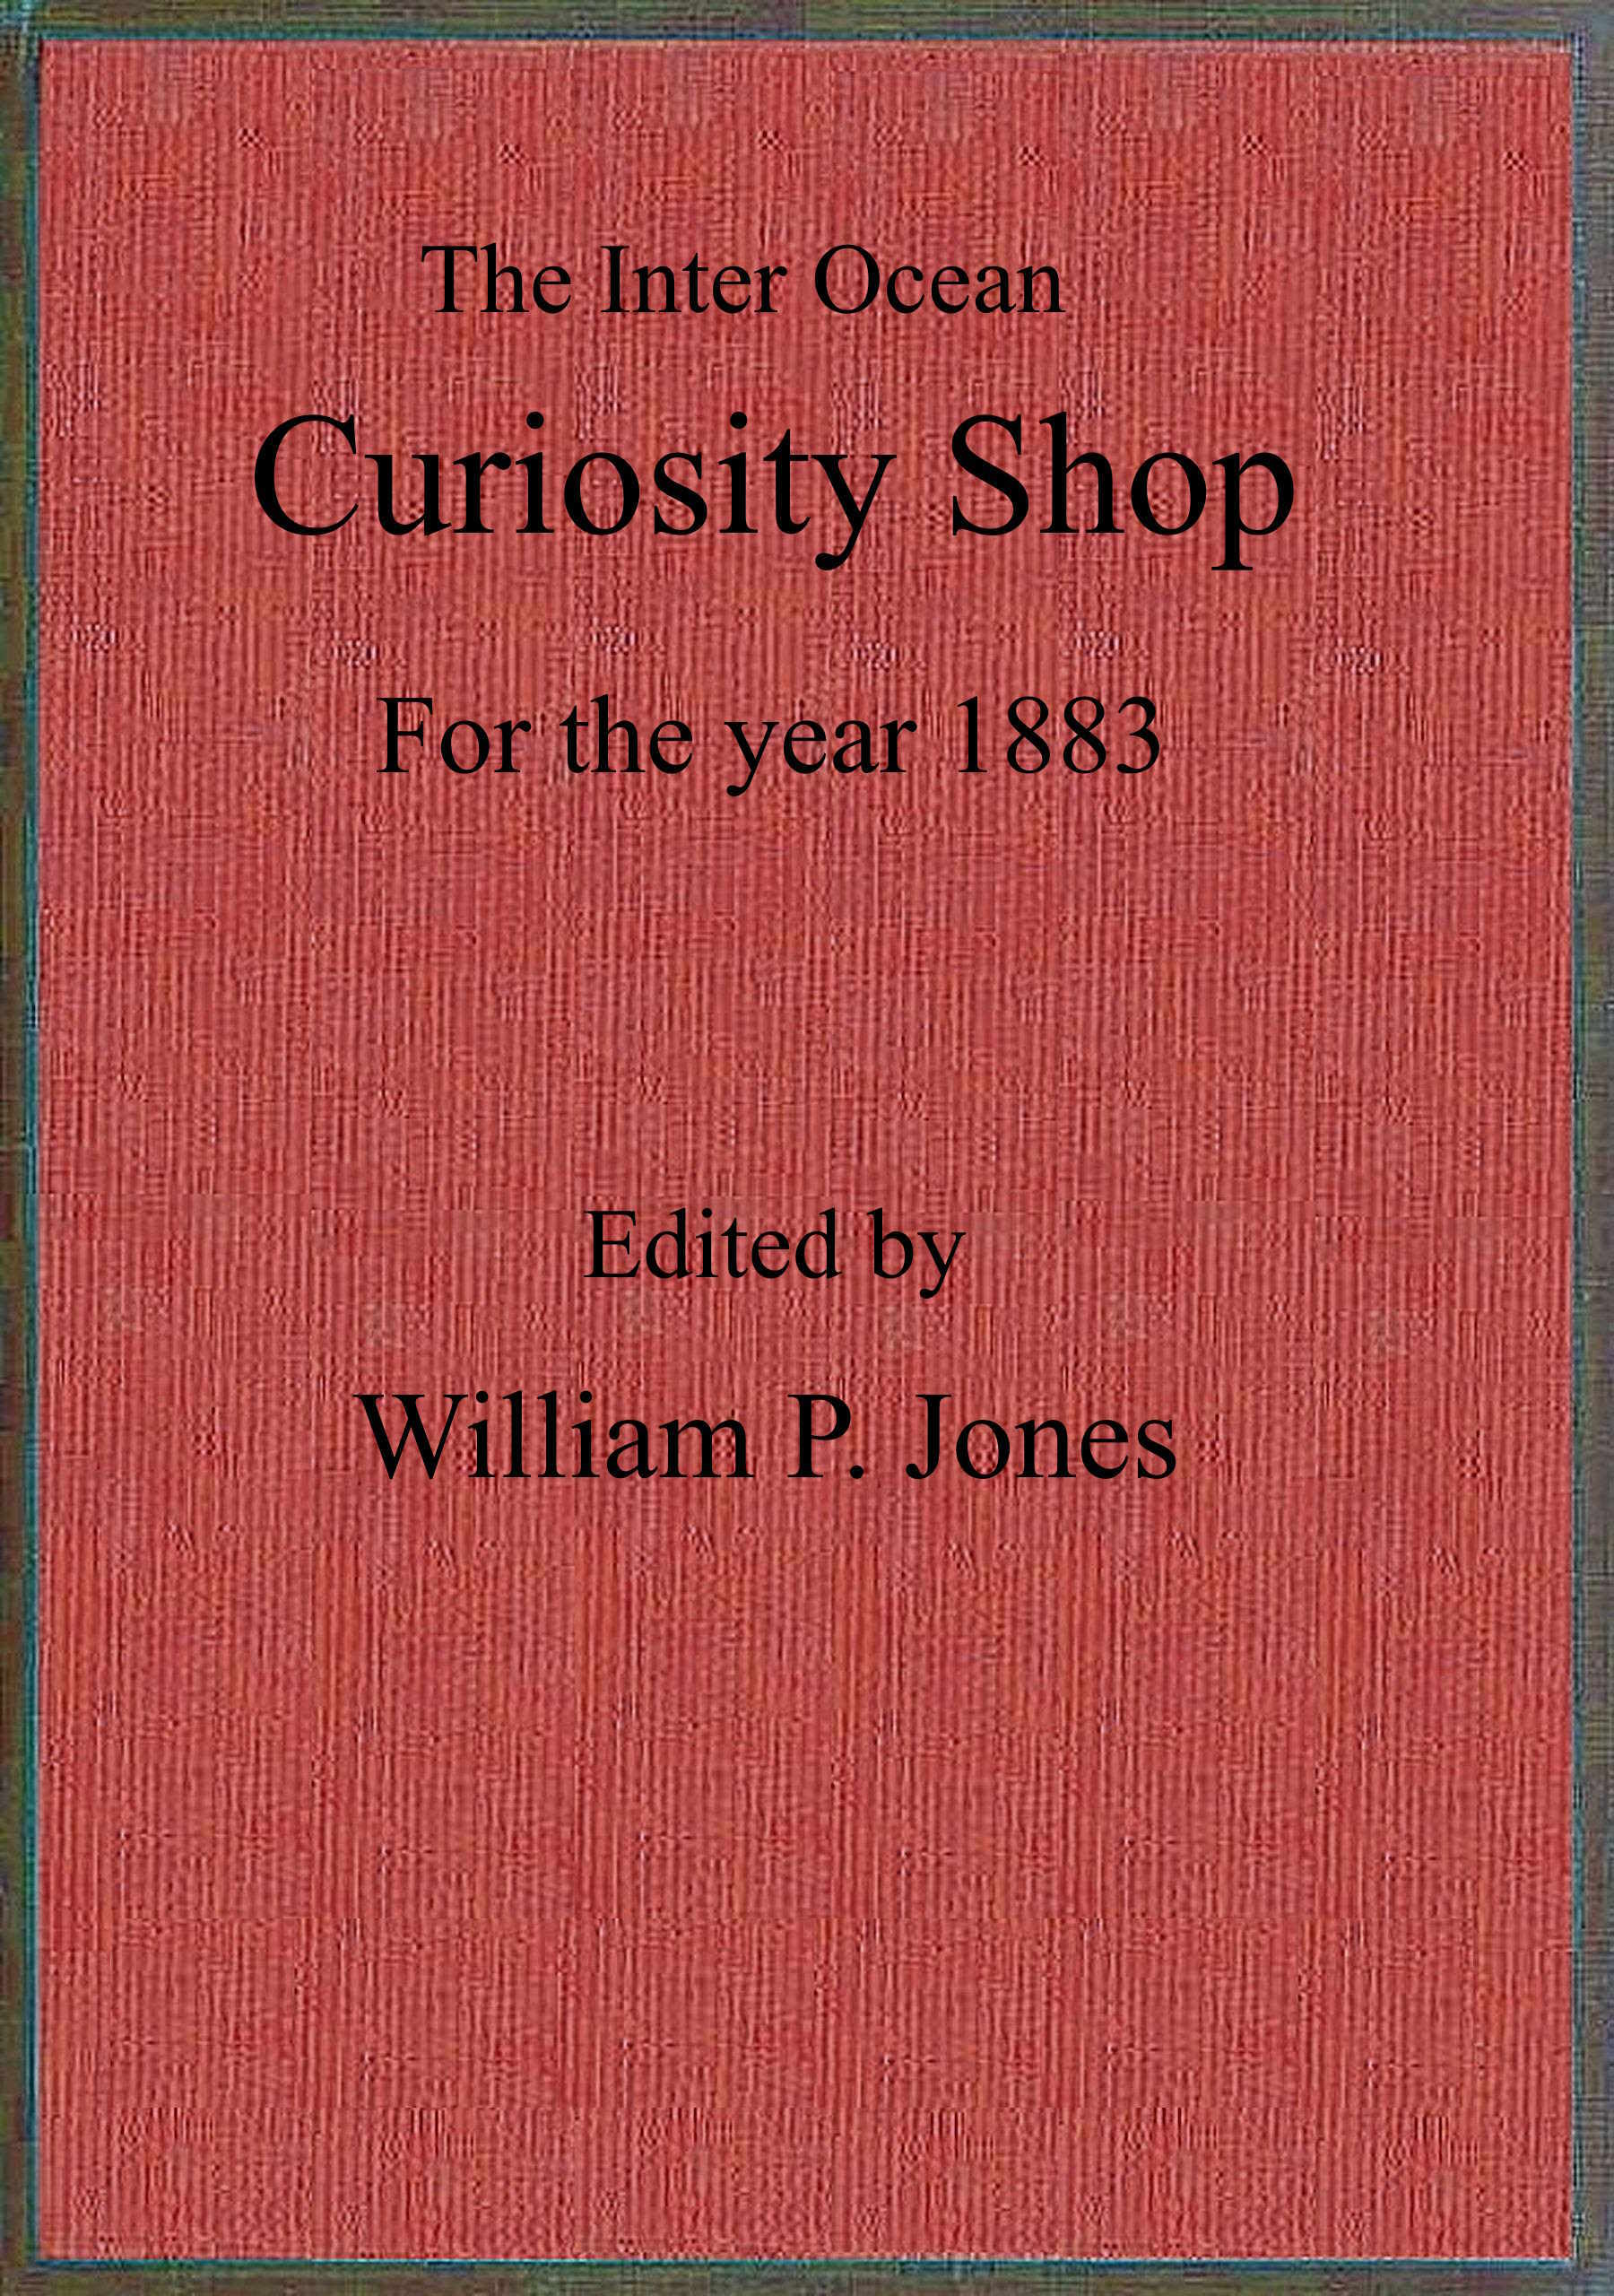 The Inter Ocean Curiosity Shop for the Year 1883